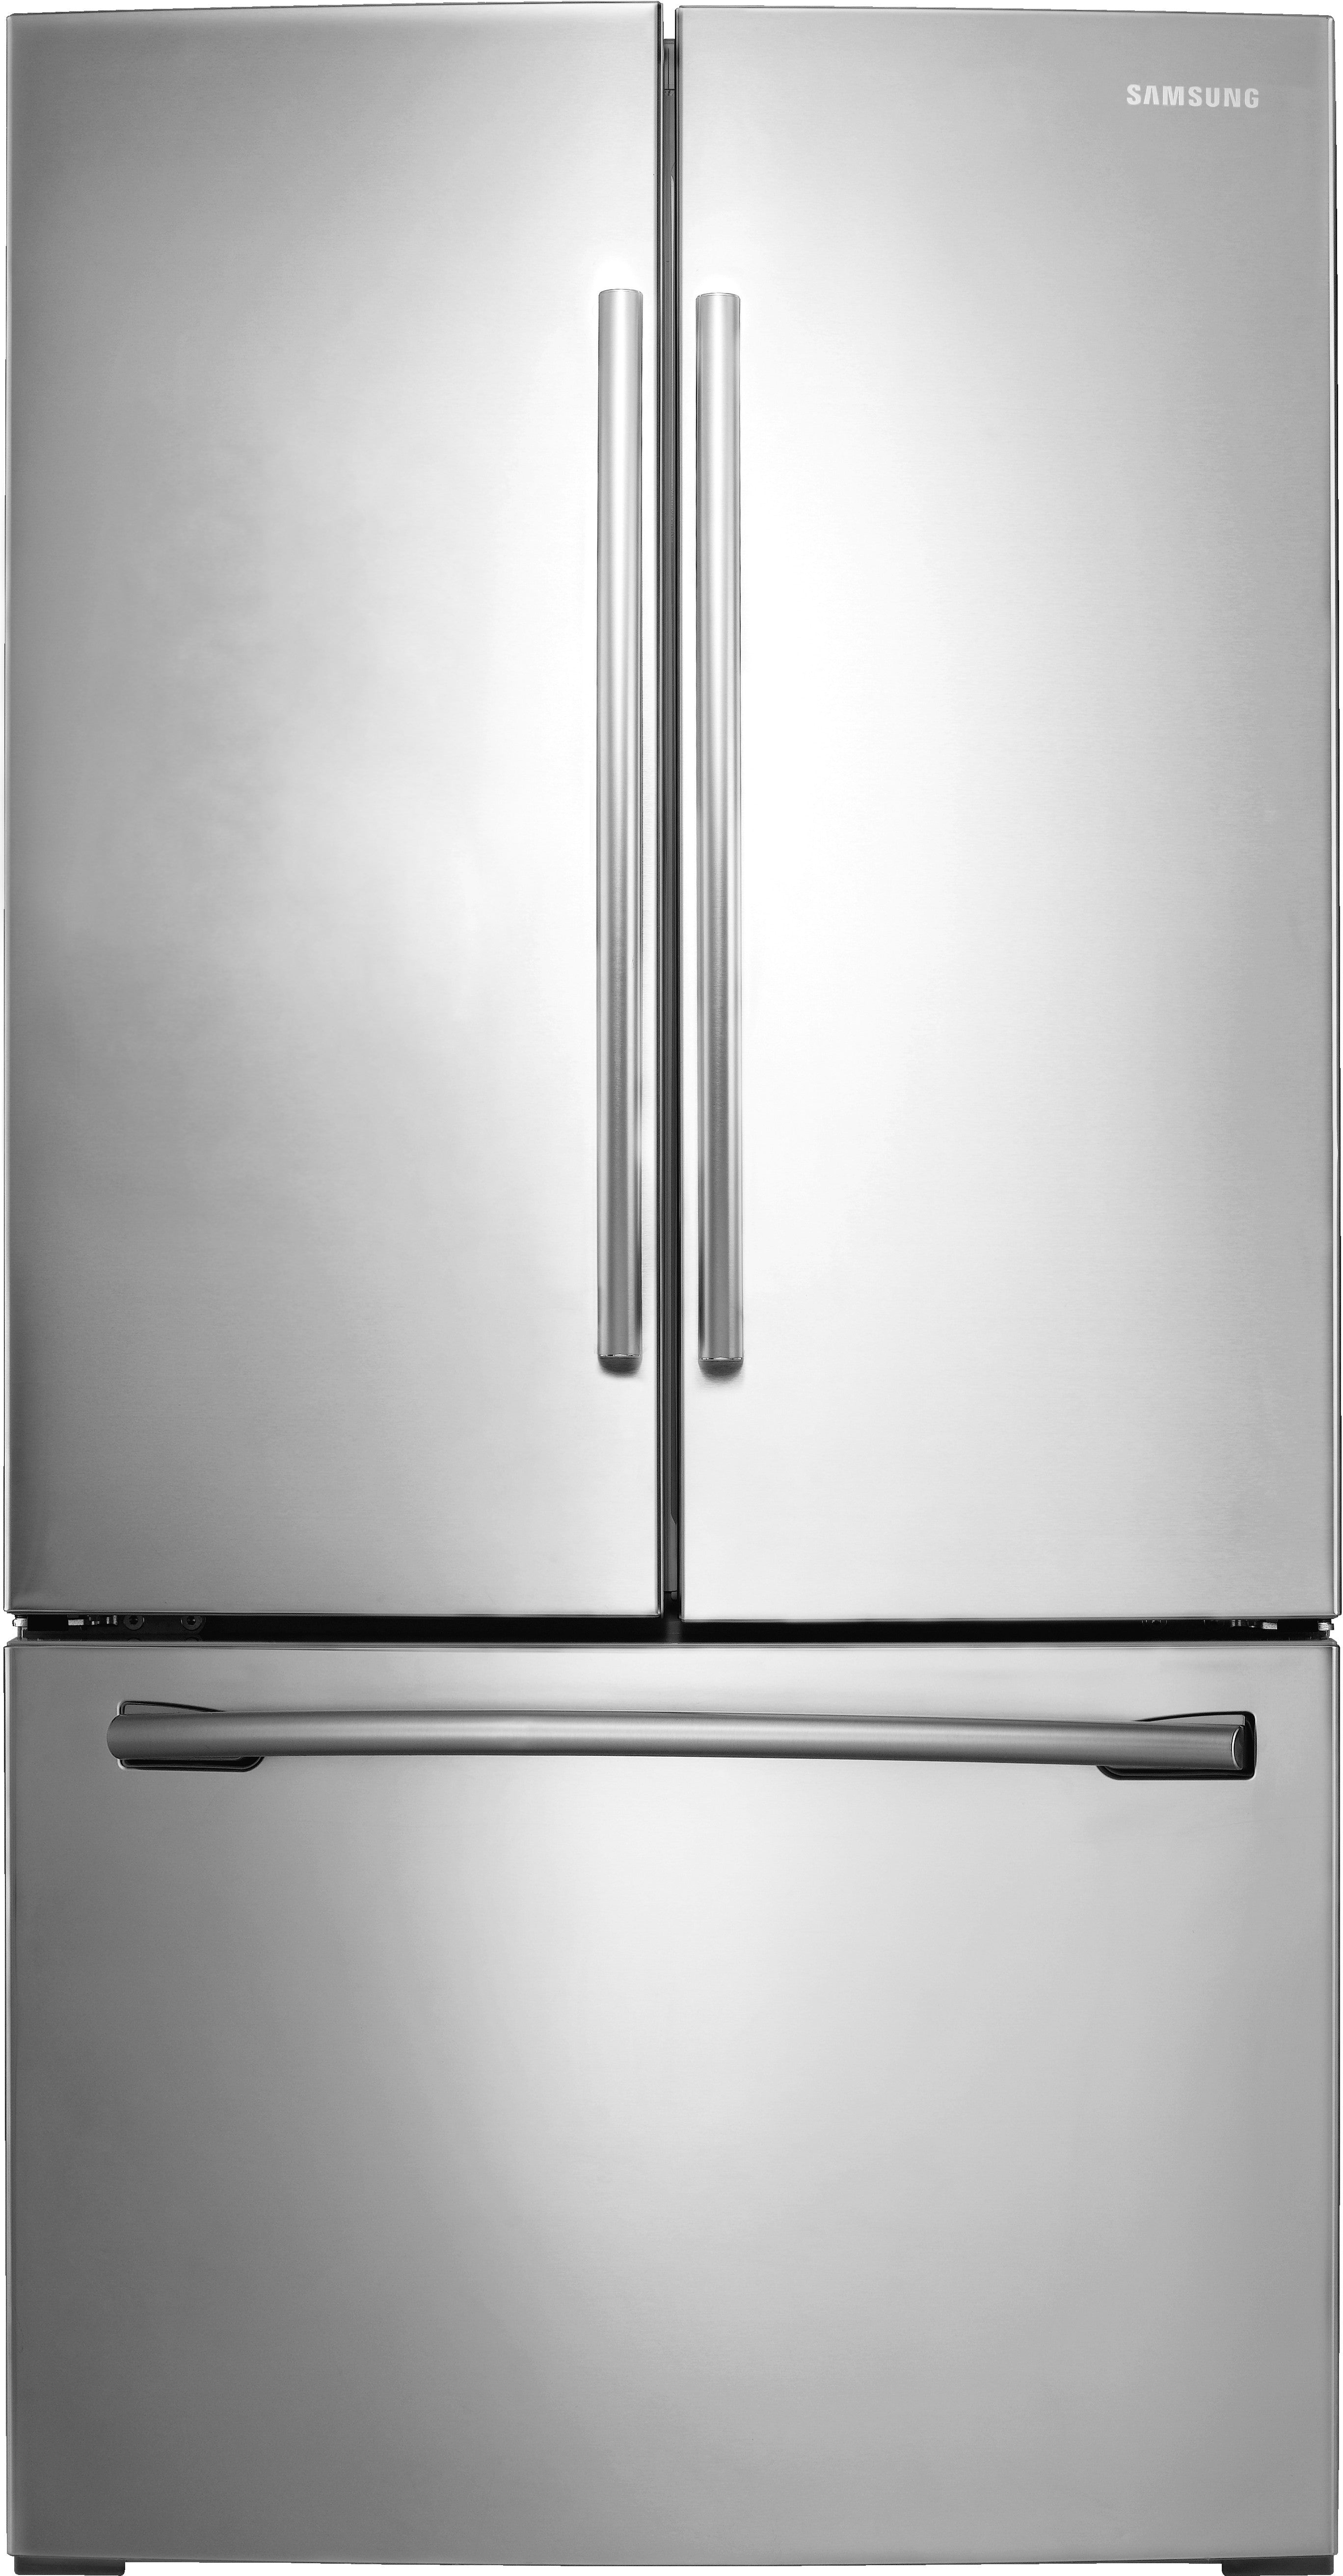 Samsung RF26HFENDSR/AA 26 Cu. Ft. French Door Refrigerator With Twin Cooling Plus